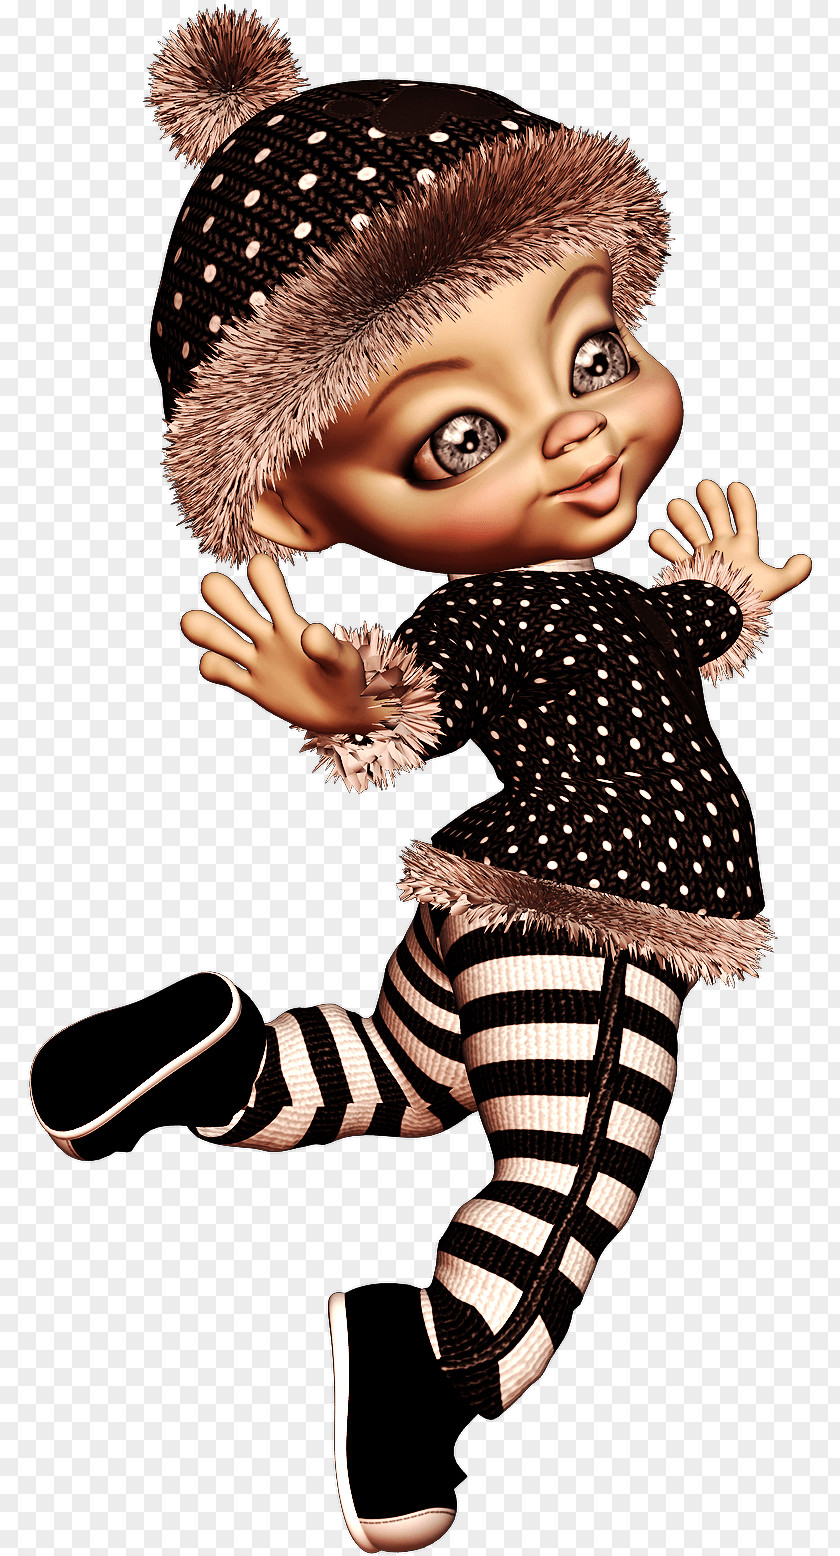 Toddler Doll Cartoon Child PNG